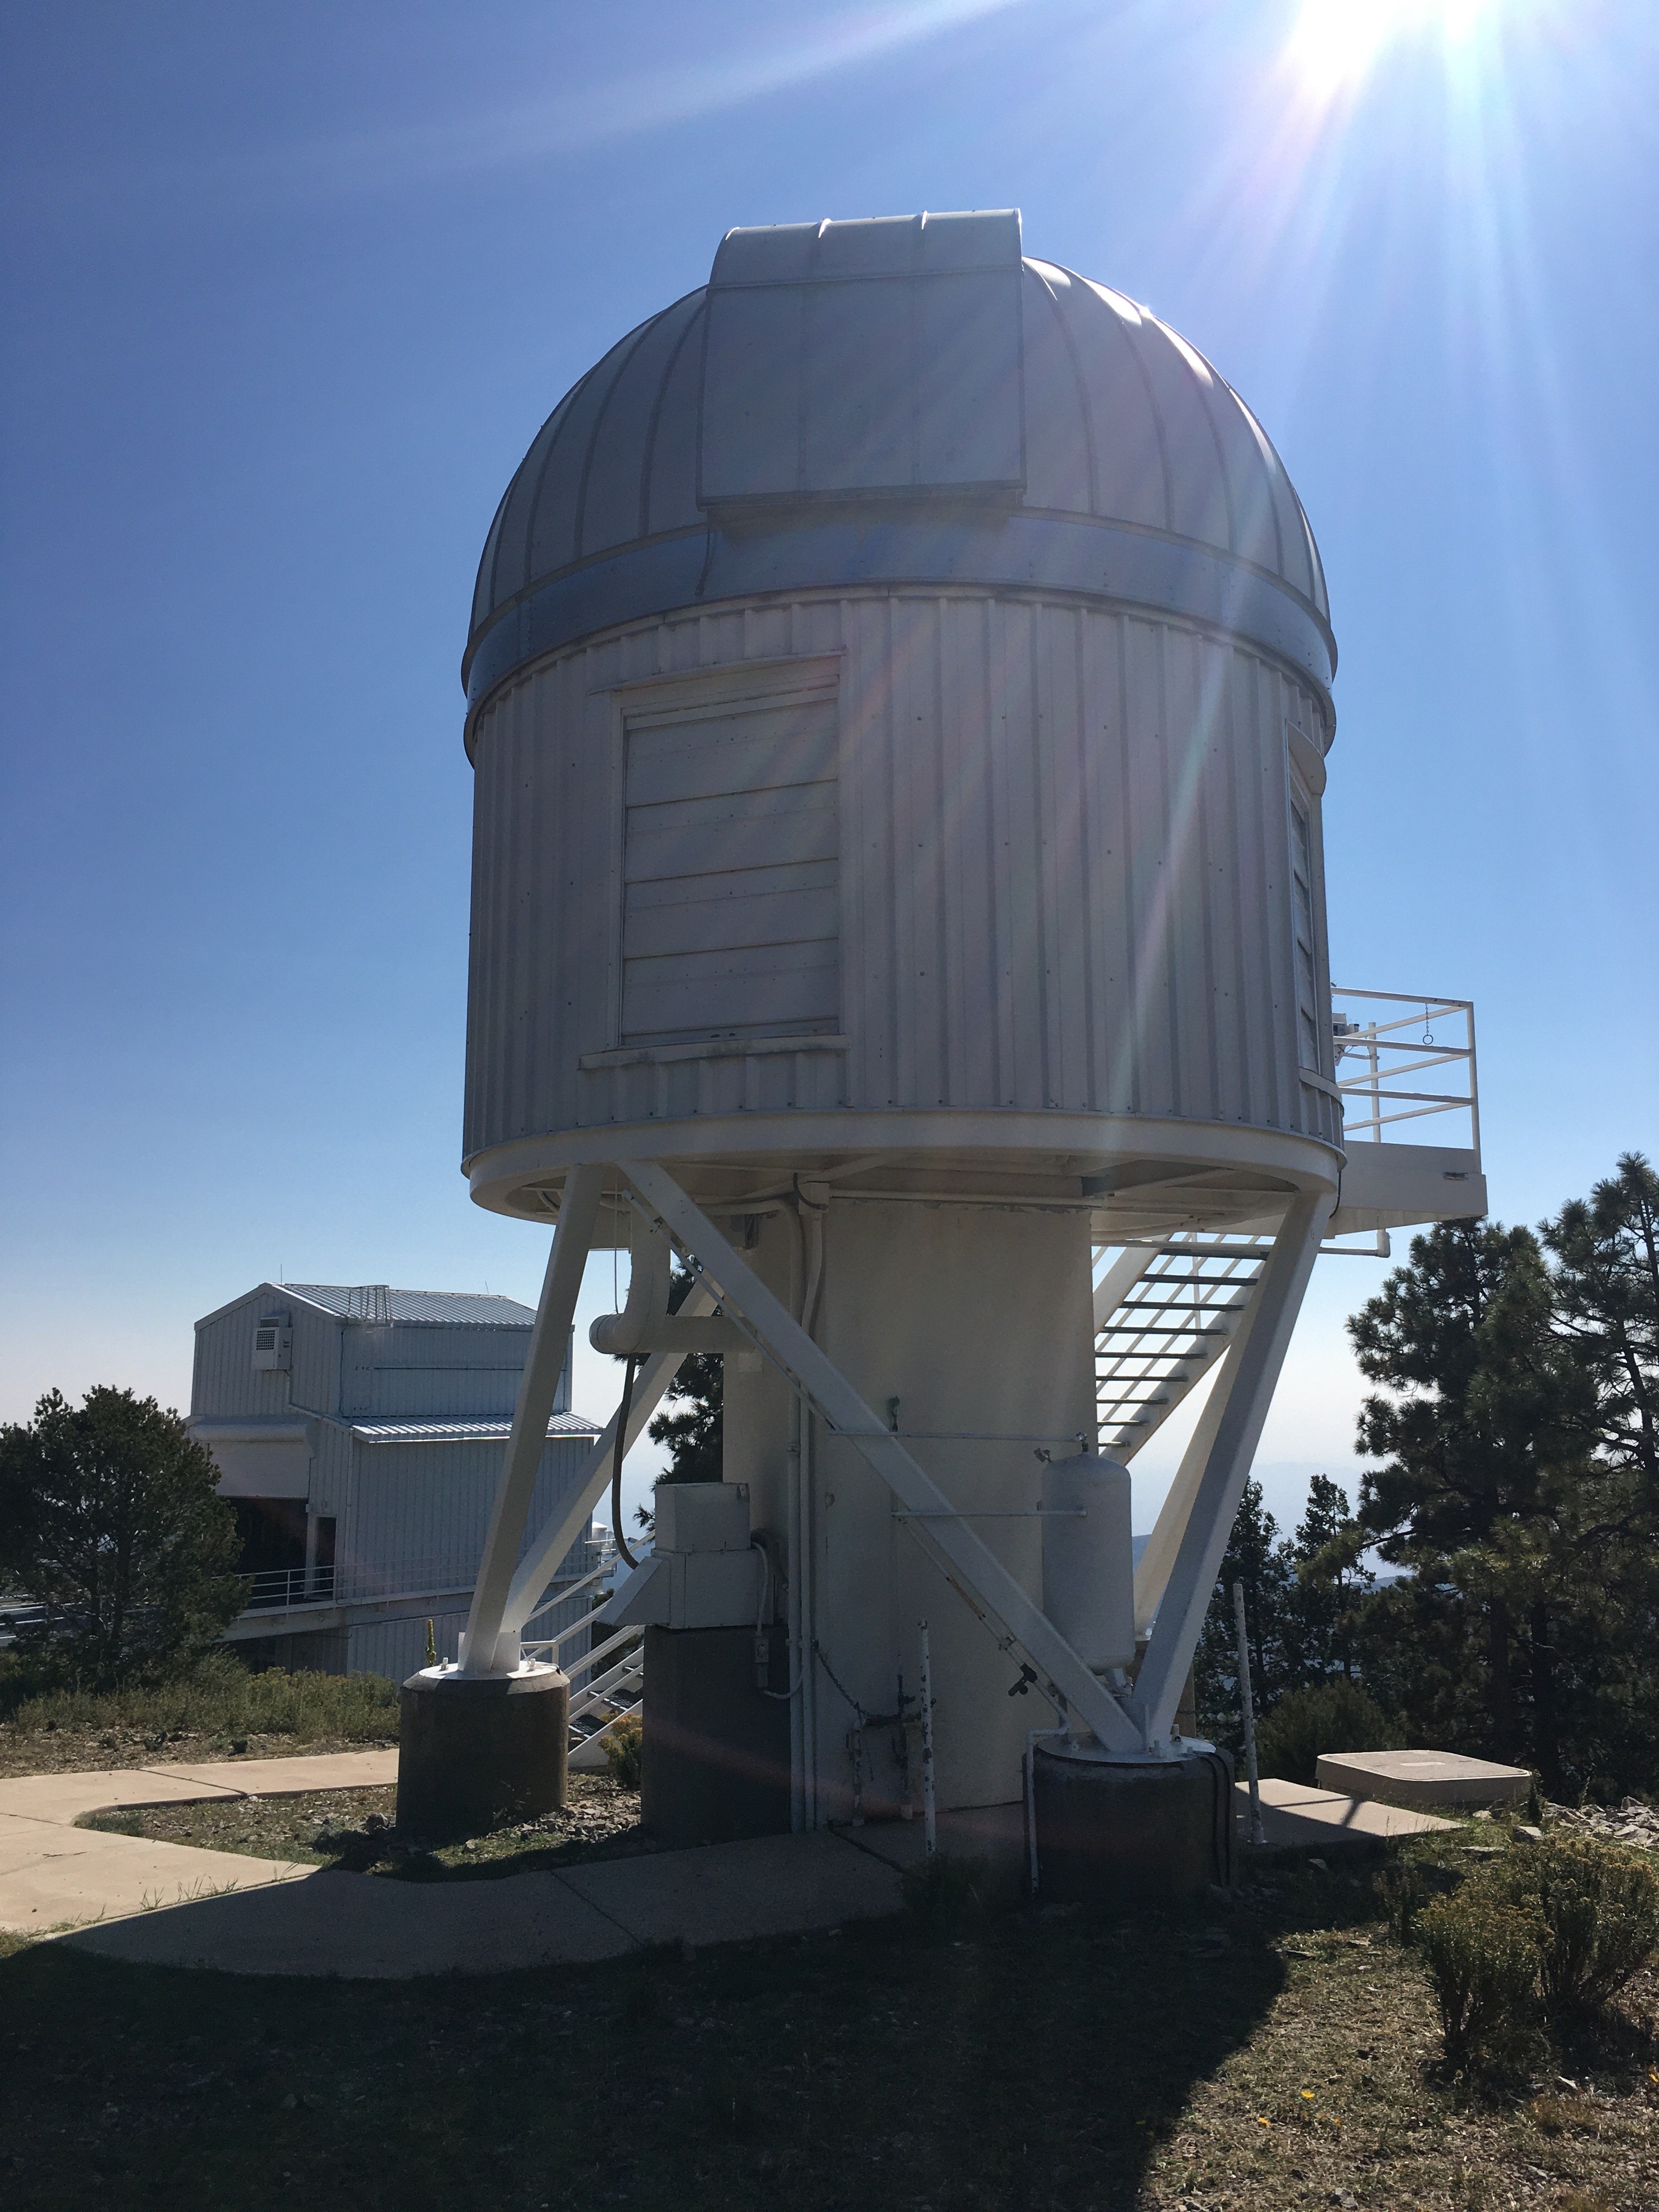 The NMSU 1-m telescope enclosure from the outside